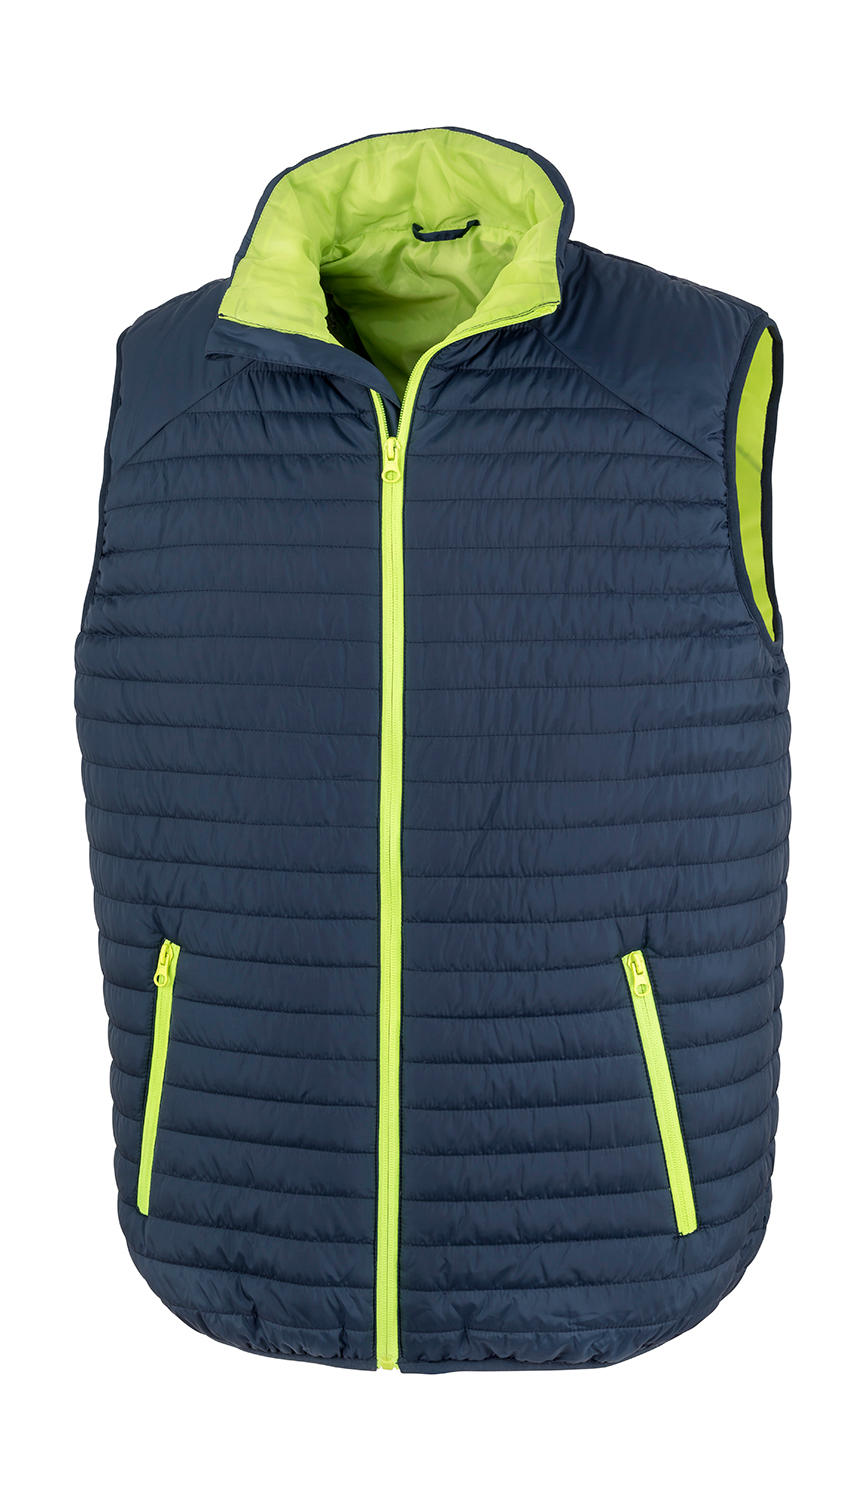  Thermoquilt Gilet in Farbe Navy/Lime